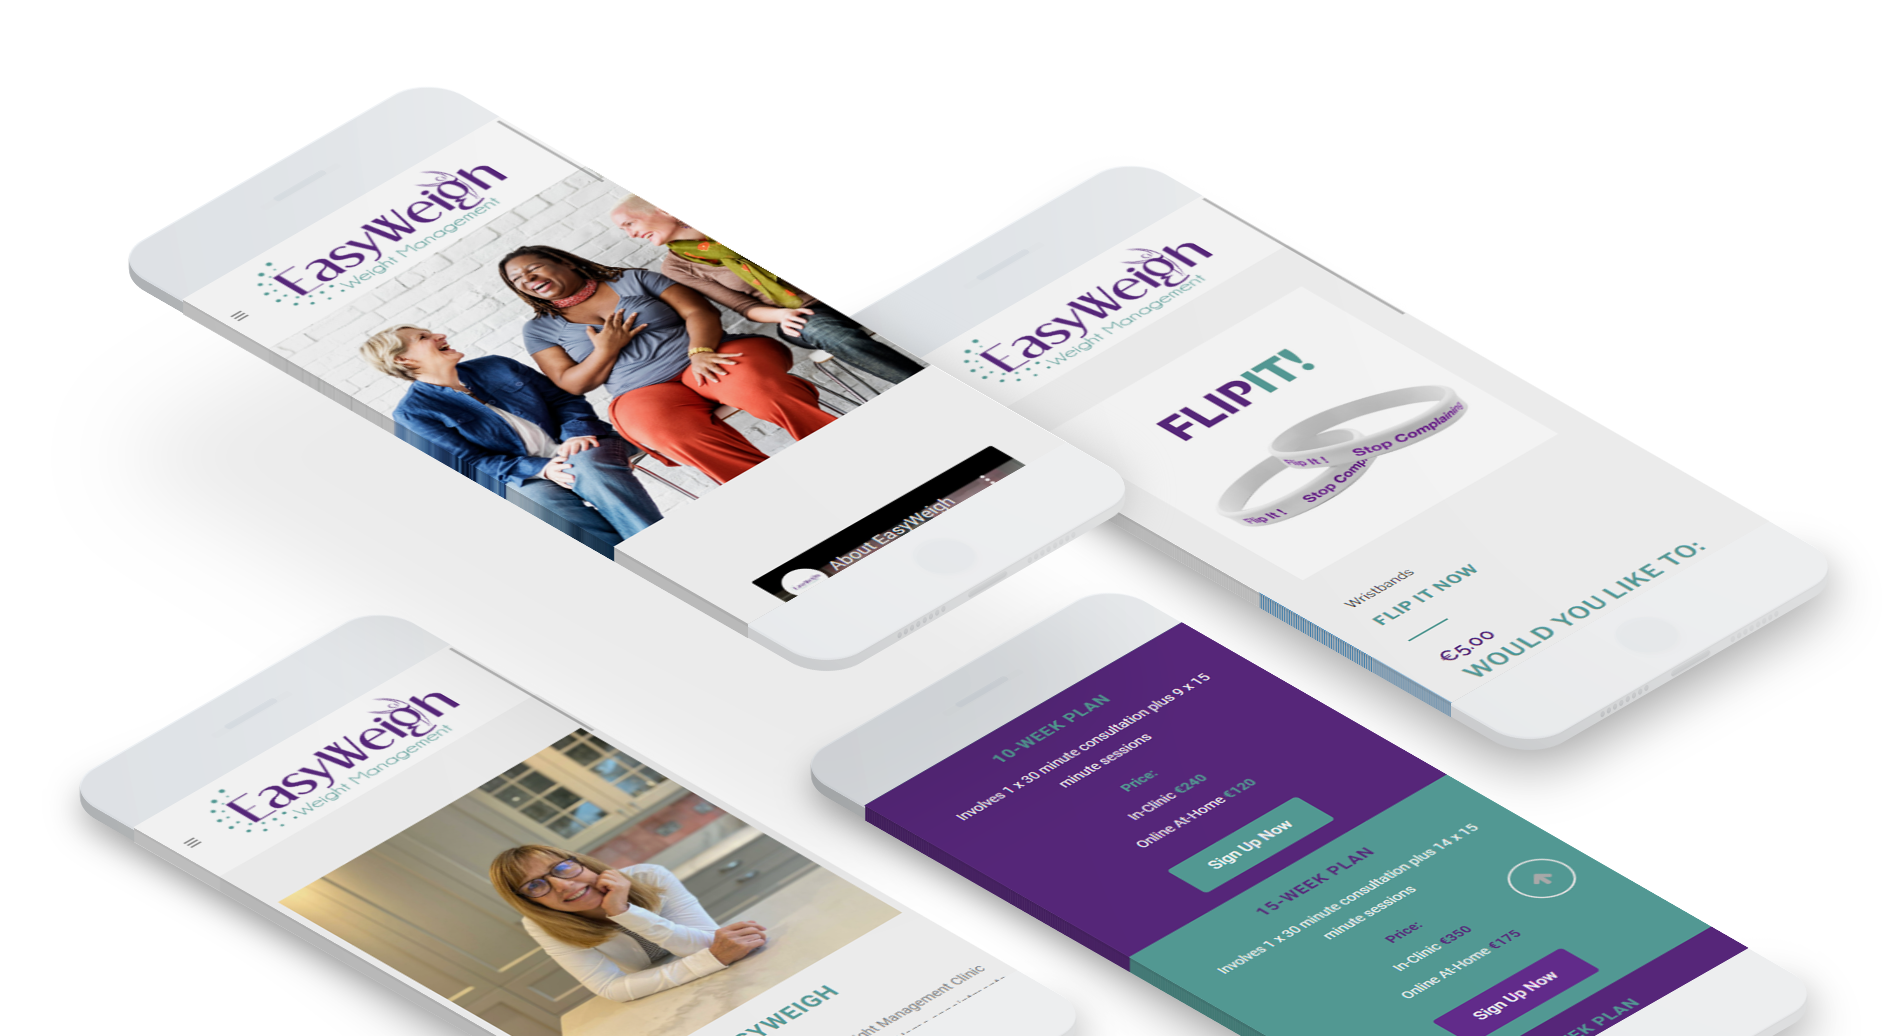 Easy Weigh Website Design Phone Mockup - Website Developed by The Digital Bakery Creative Agency in Dundalk Louth